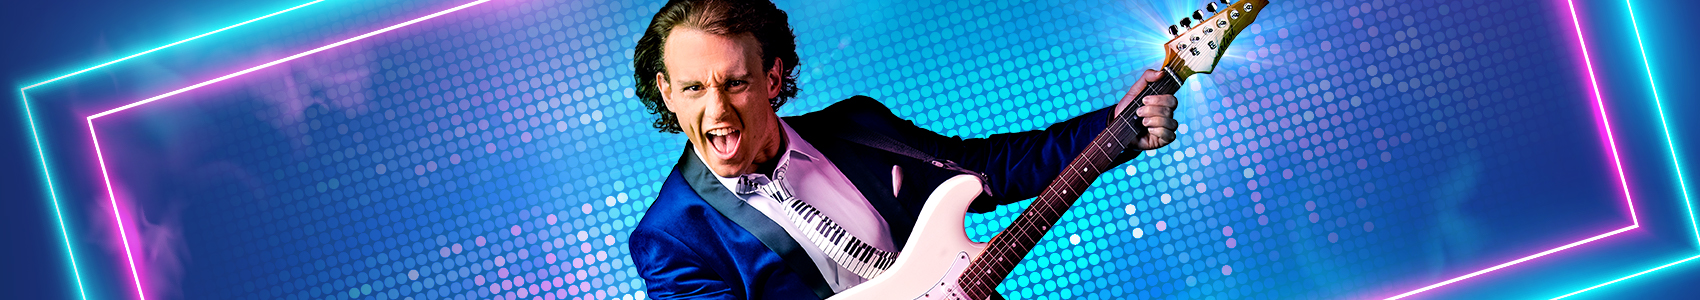 Just announced - The Wedding Singer Musical